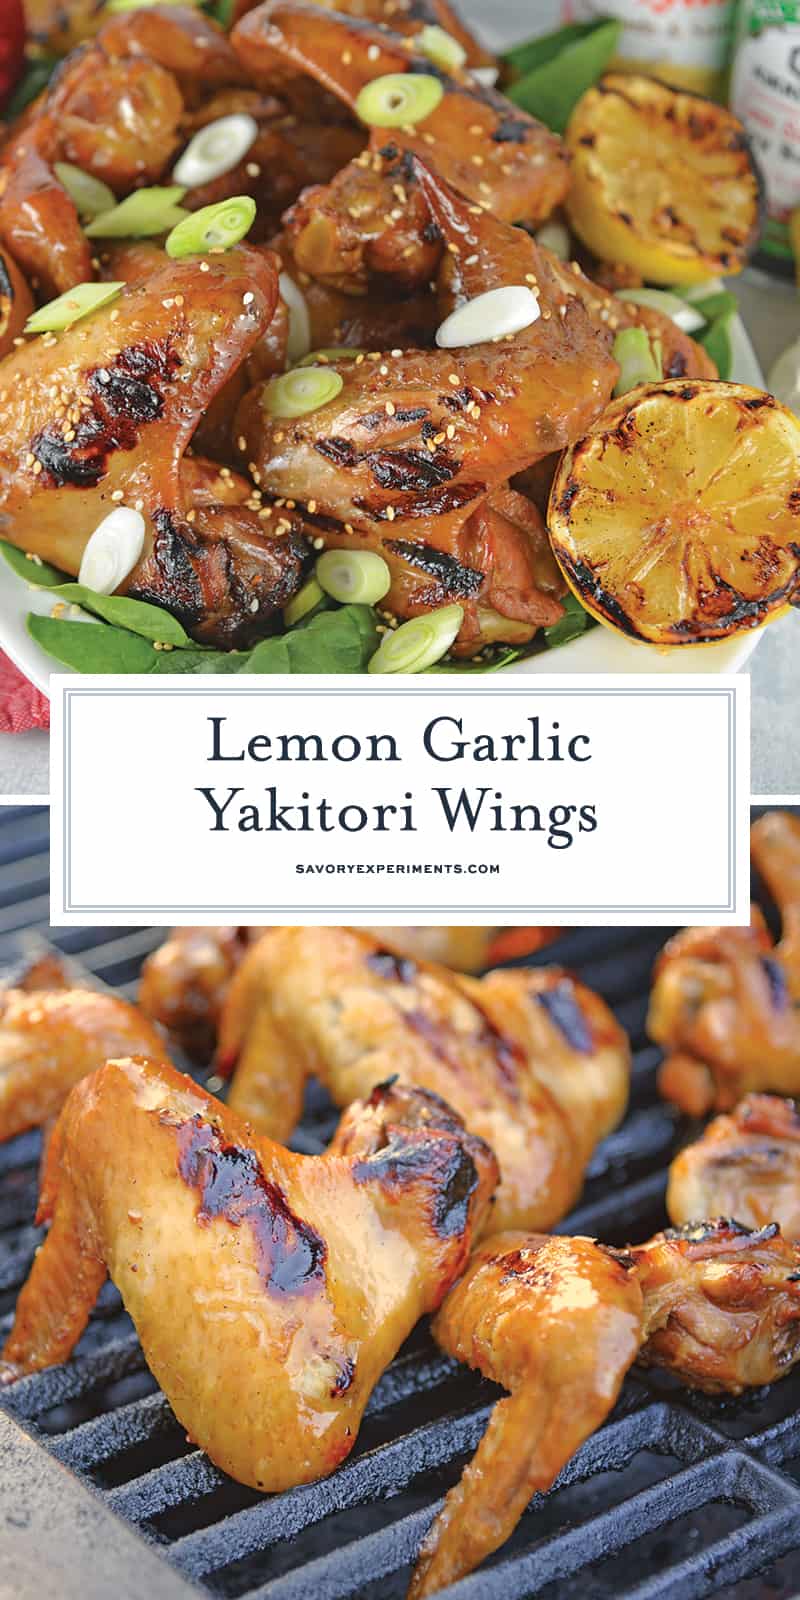 Lemon Garlic Yakitori Wings are marinated in a zesty lemon garlic marinade and grilled to perfection. Serve your grilled wings with classic BBQ side dishes. #grilledwings #chickenmarinades www.savoryexperiments.com 